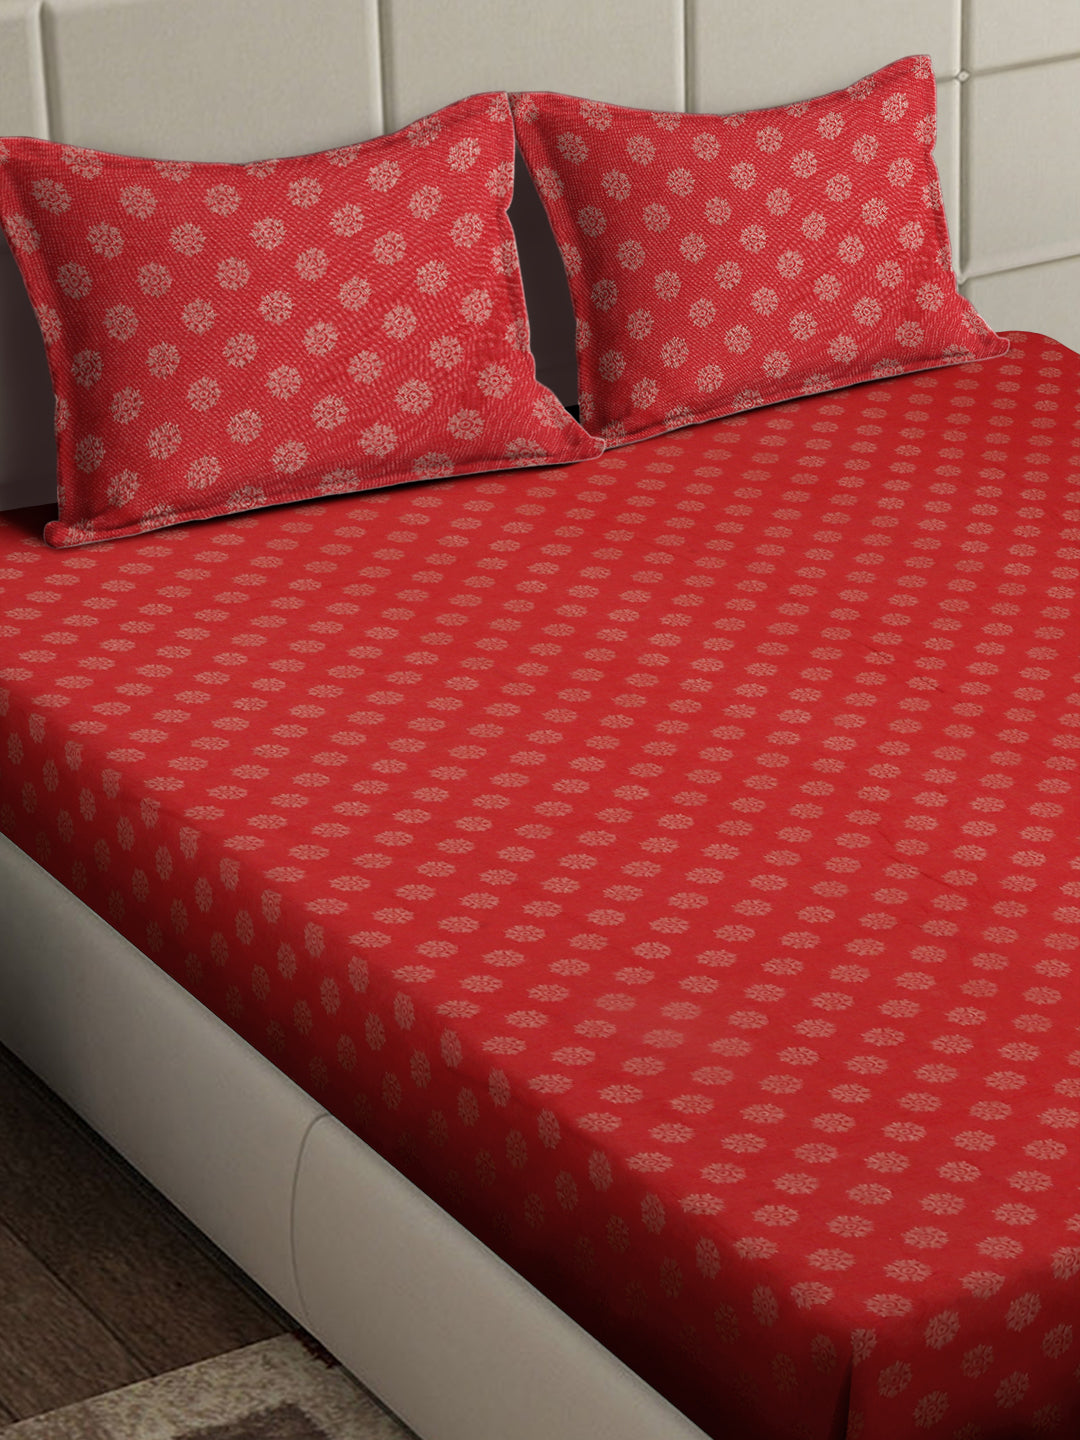 Arrabi Red Floral 100% Handwoven Cotton Super King Size Bedsheet with 2 Pillow Covers (270 x 260 cm)